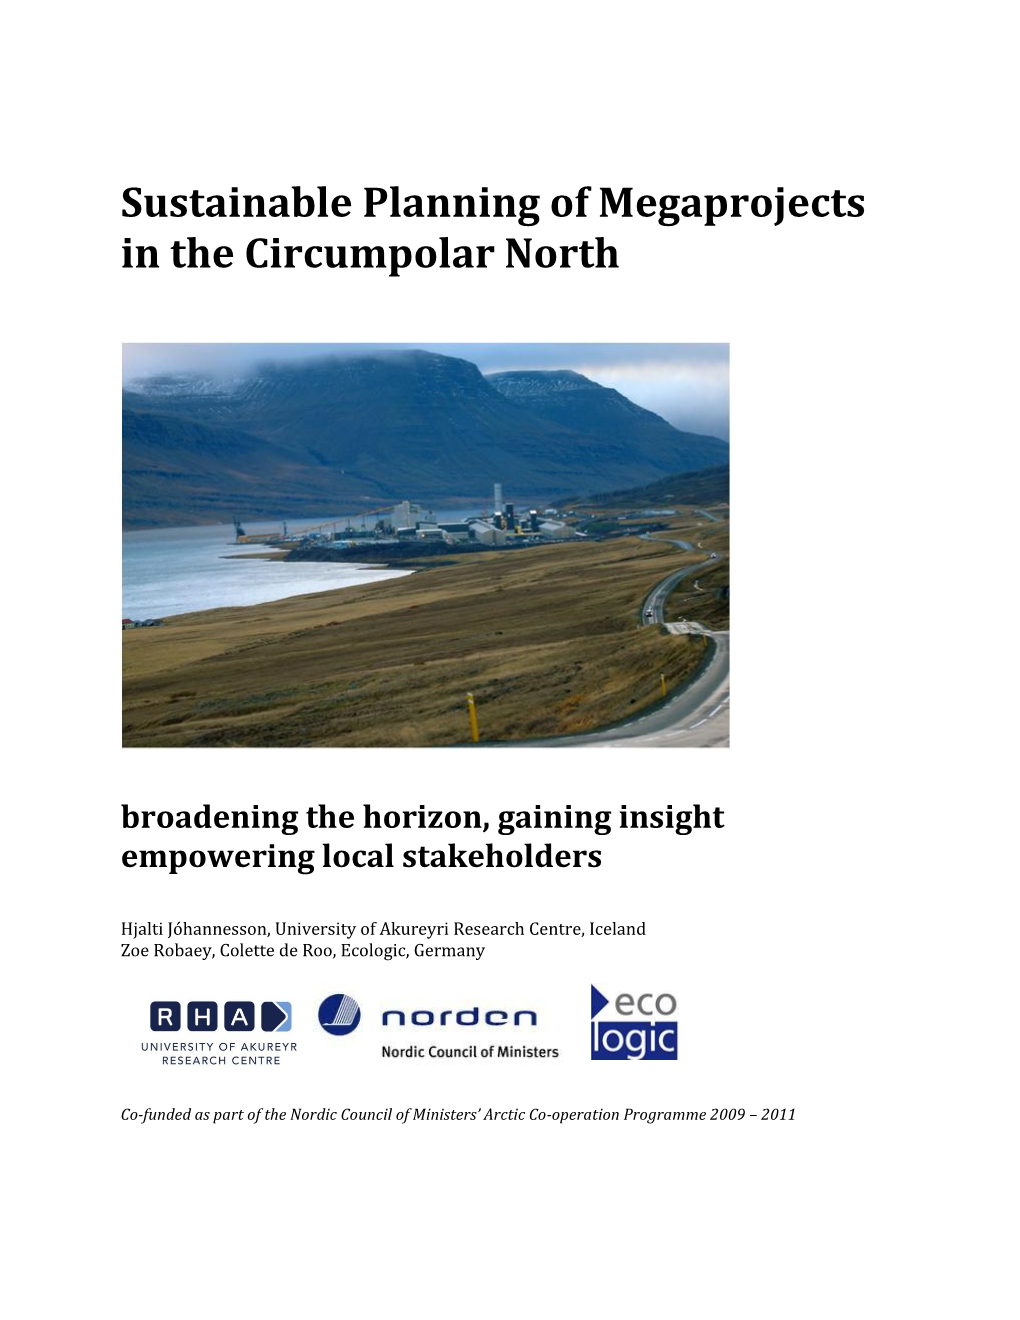 Sustainable Planning of Megaprojects in the Circumpolar North